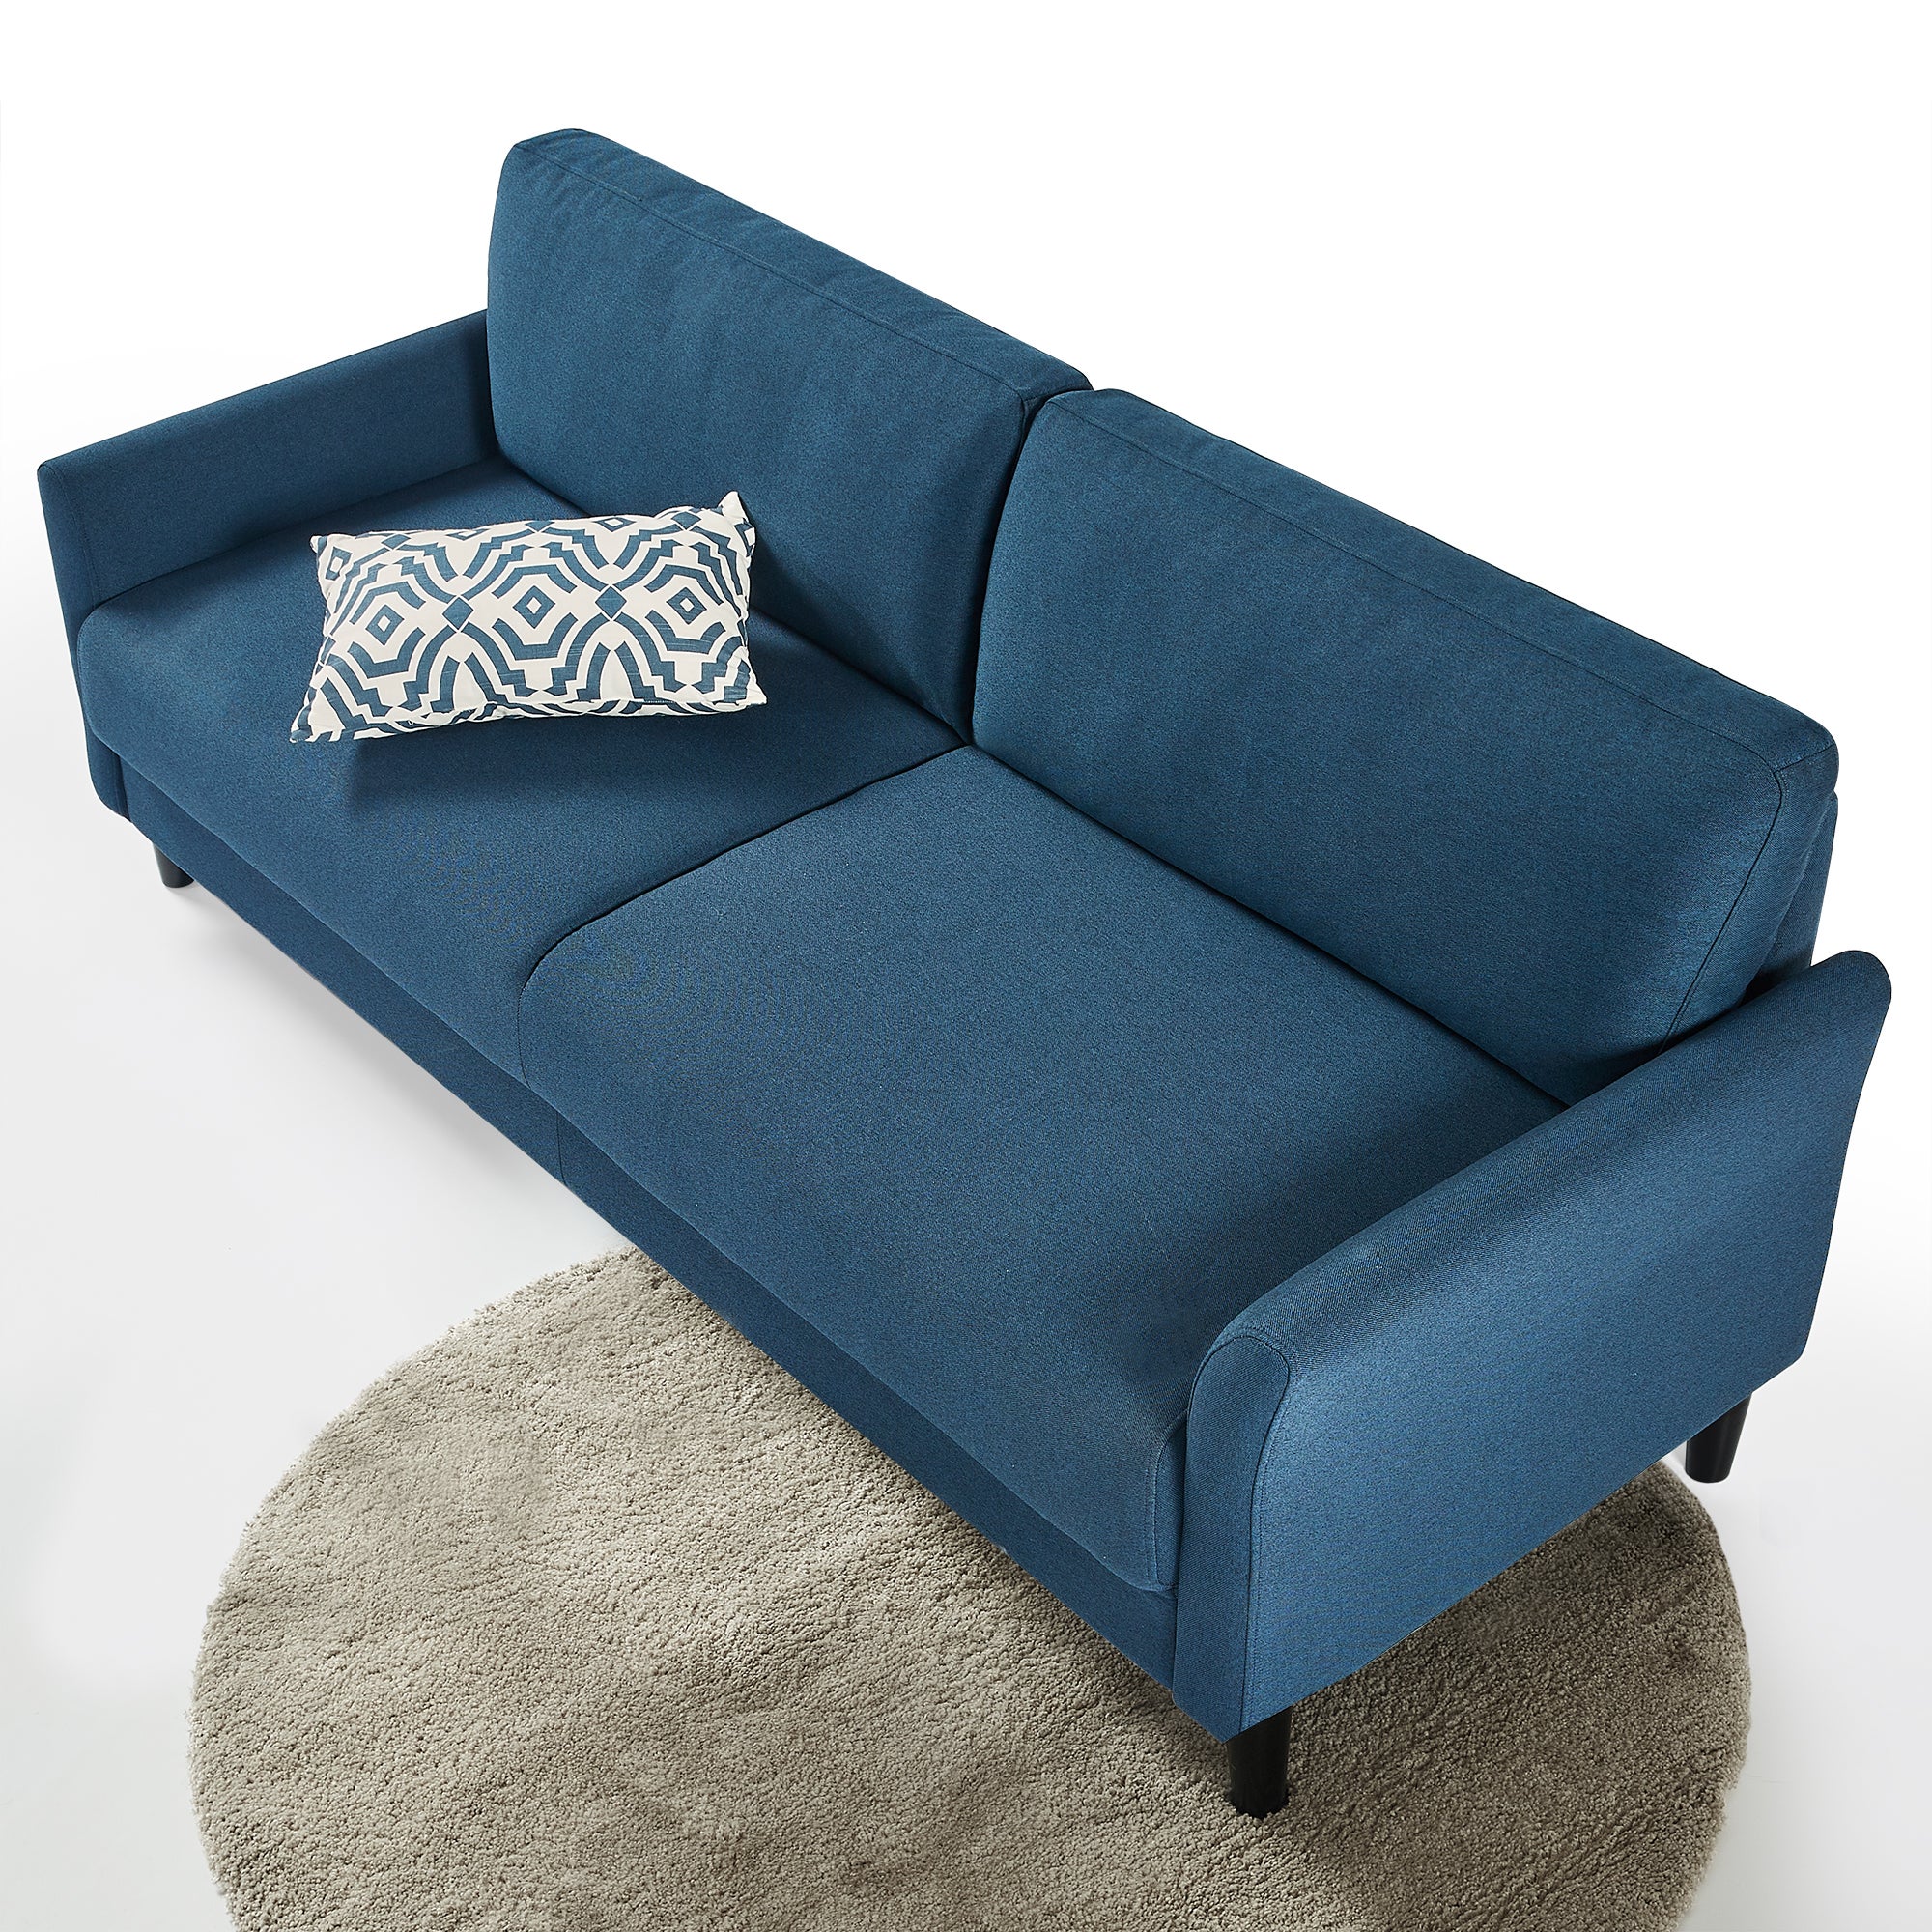 Zinus Jackie 3 Seater Sofa Couch - Blue